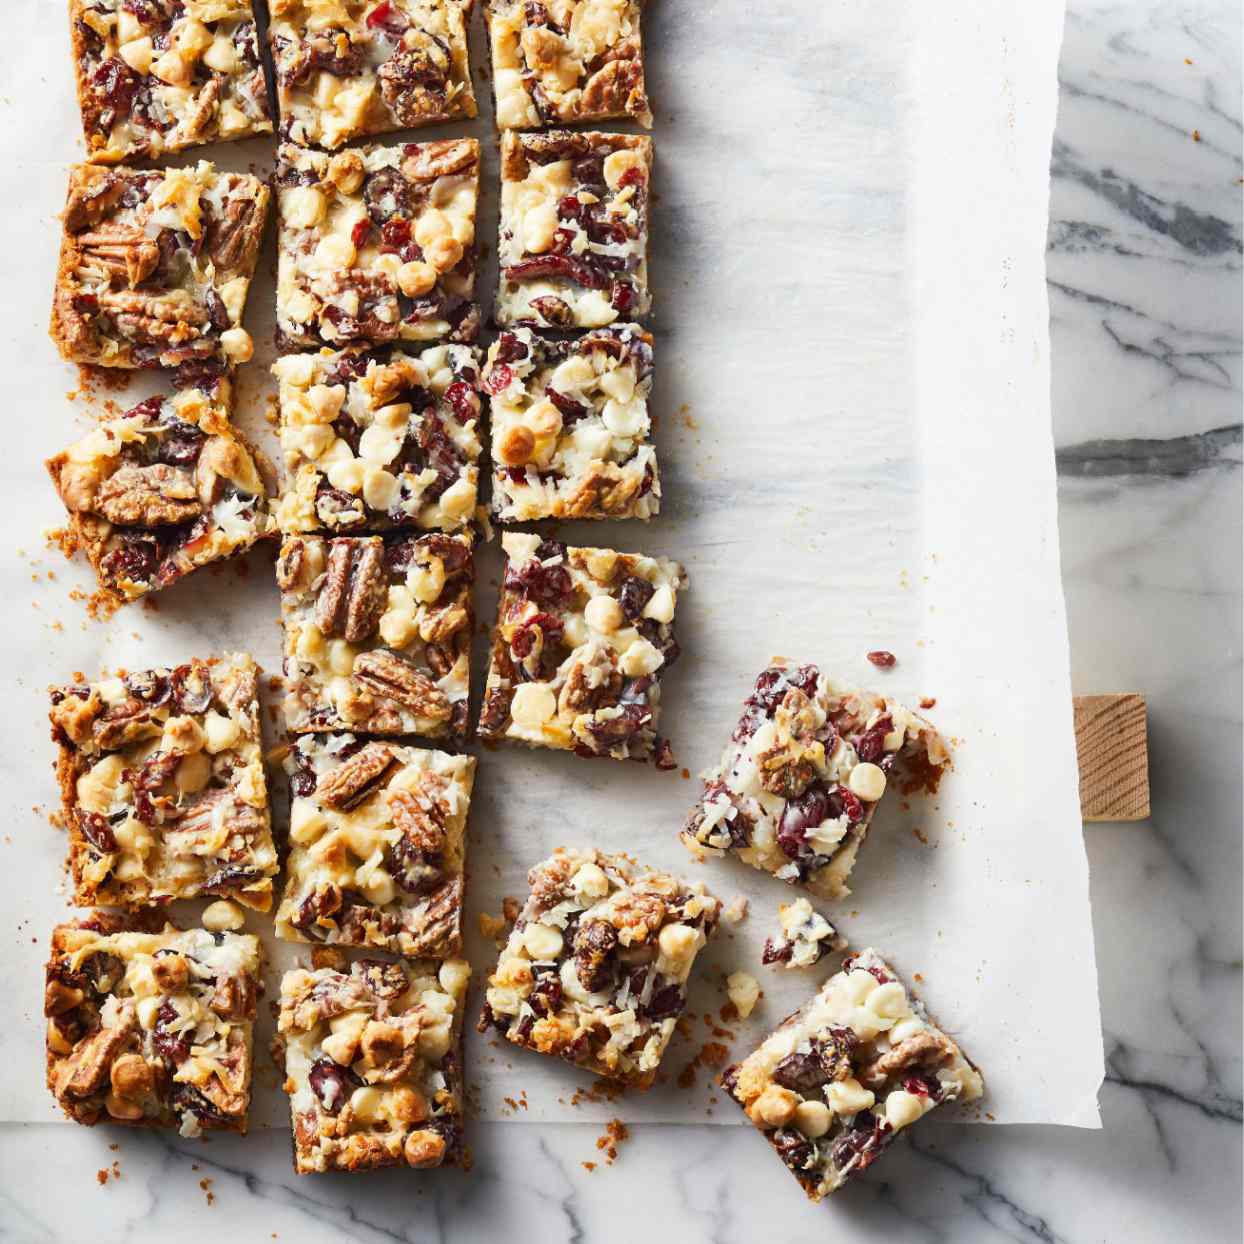 Coconut-Cranberry Bars with Pecans